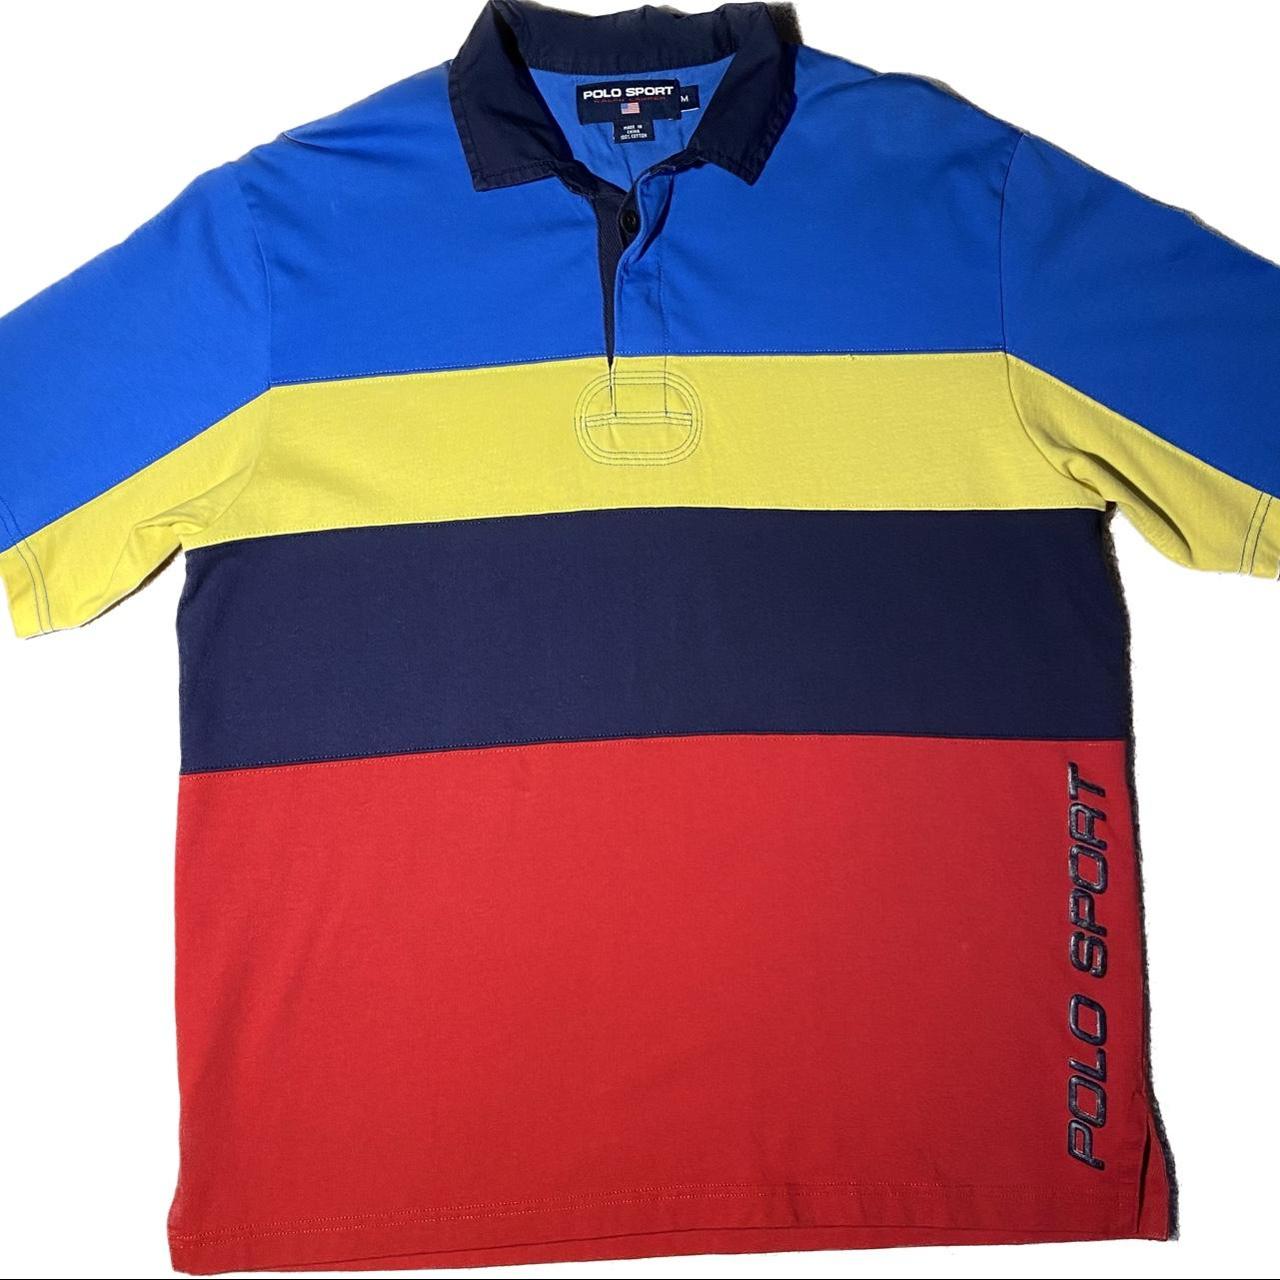 Polo Ralph Lauren Men's Polo Shirt Sport Rugby Shirt in Red Multi